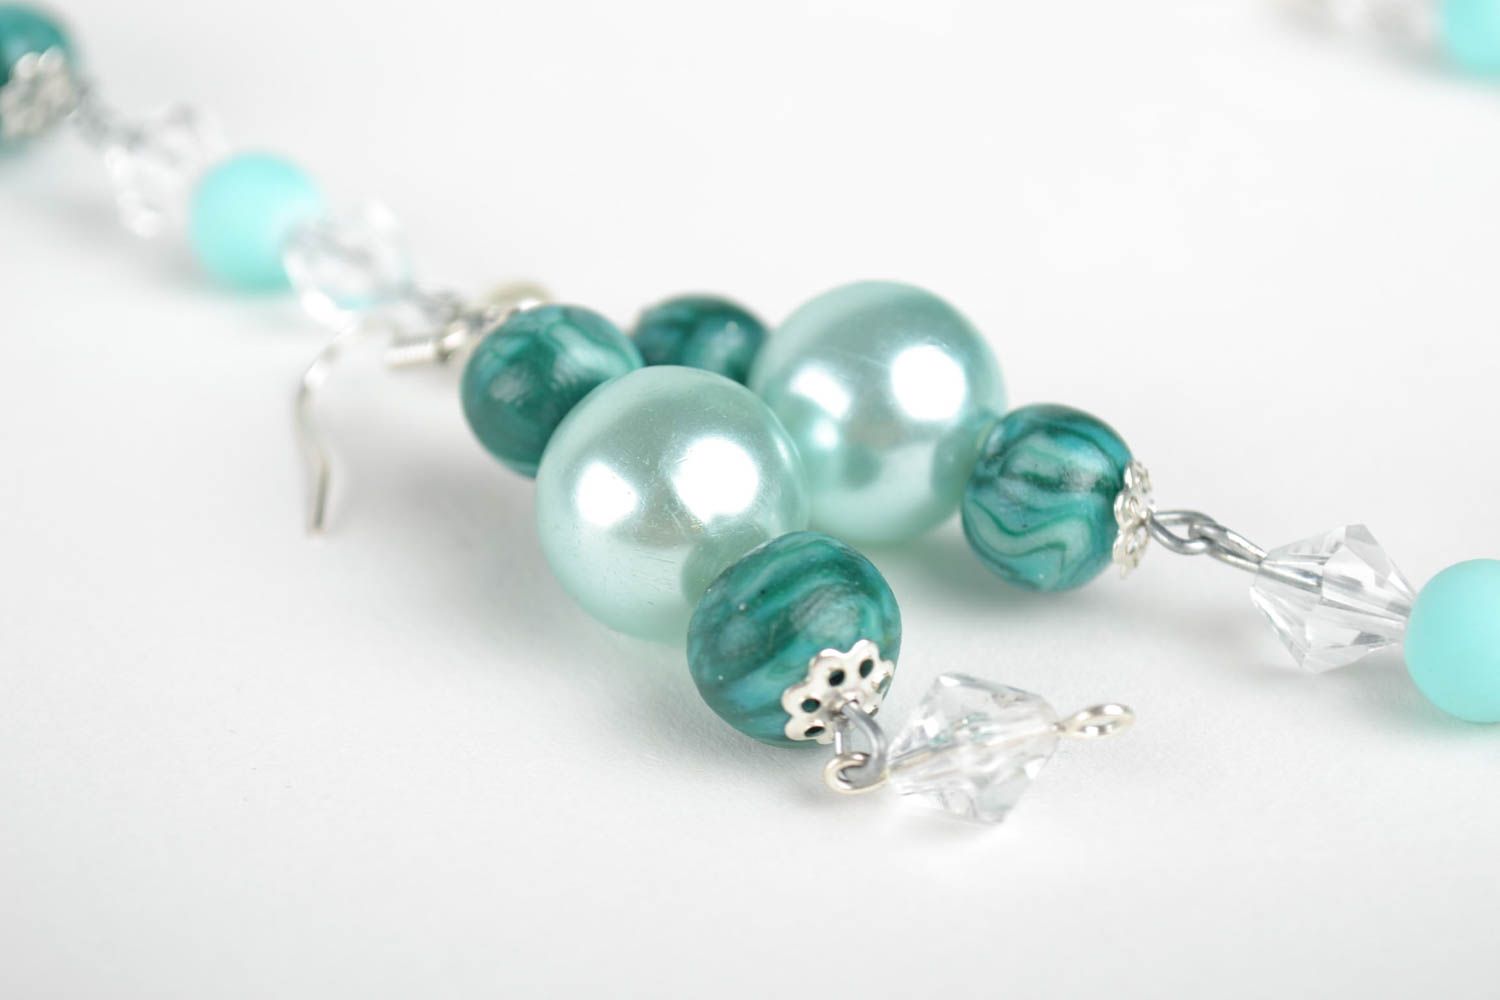 Handmade designer bijouterie made of beads polymer clay earrings and necklace photo 3